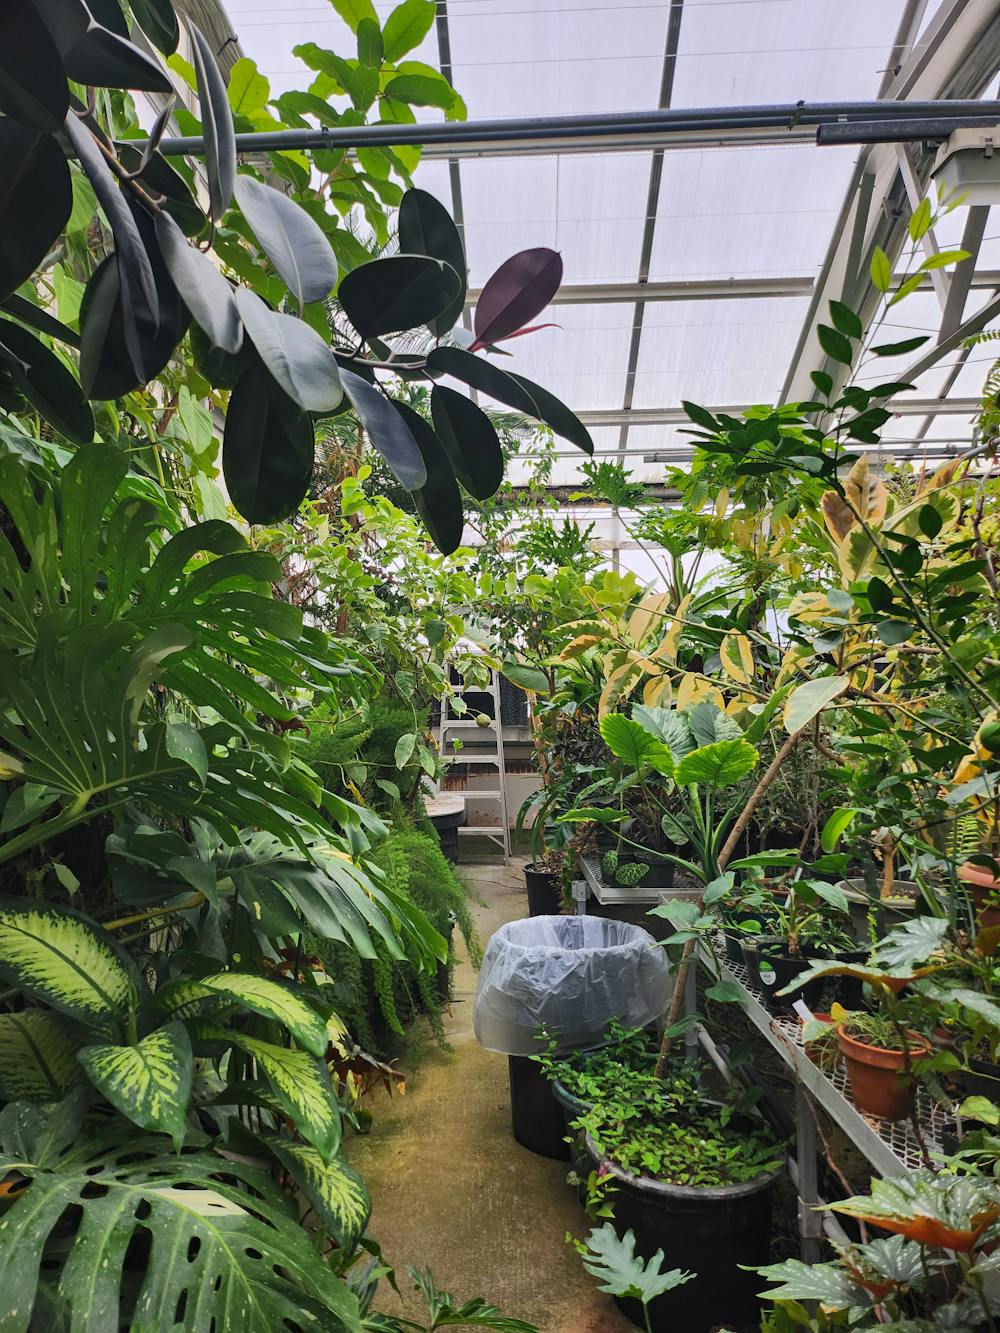 Eastern Michigan University Greenhouse brings plant knowledge to the community